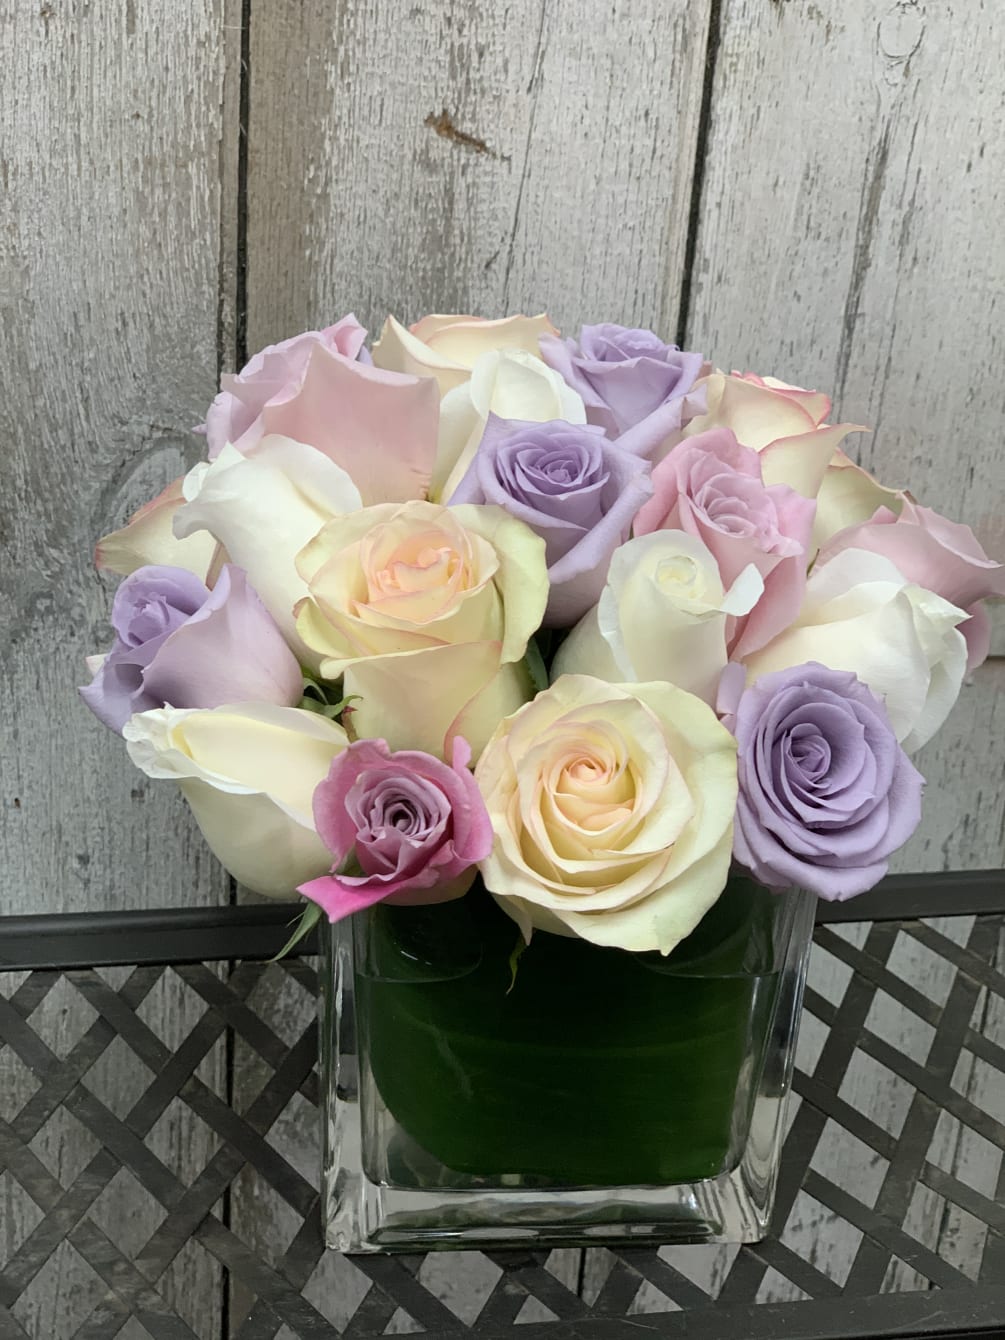 Mixture of soft pink. lavender, white cream roses. Contains at least 25